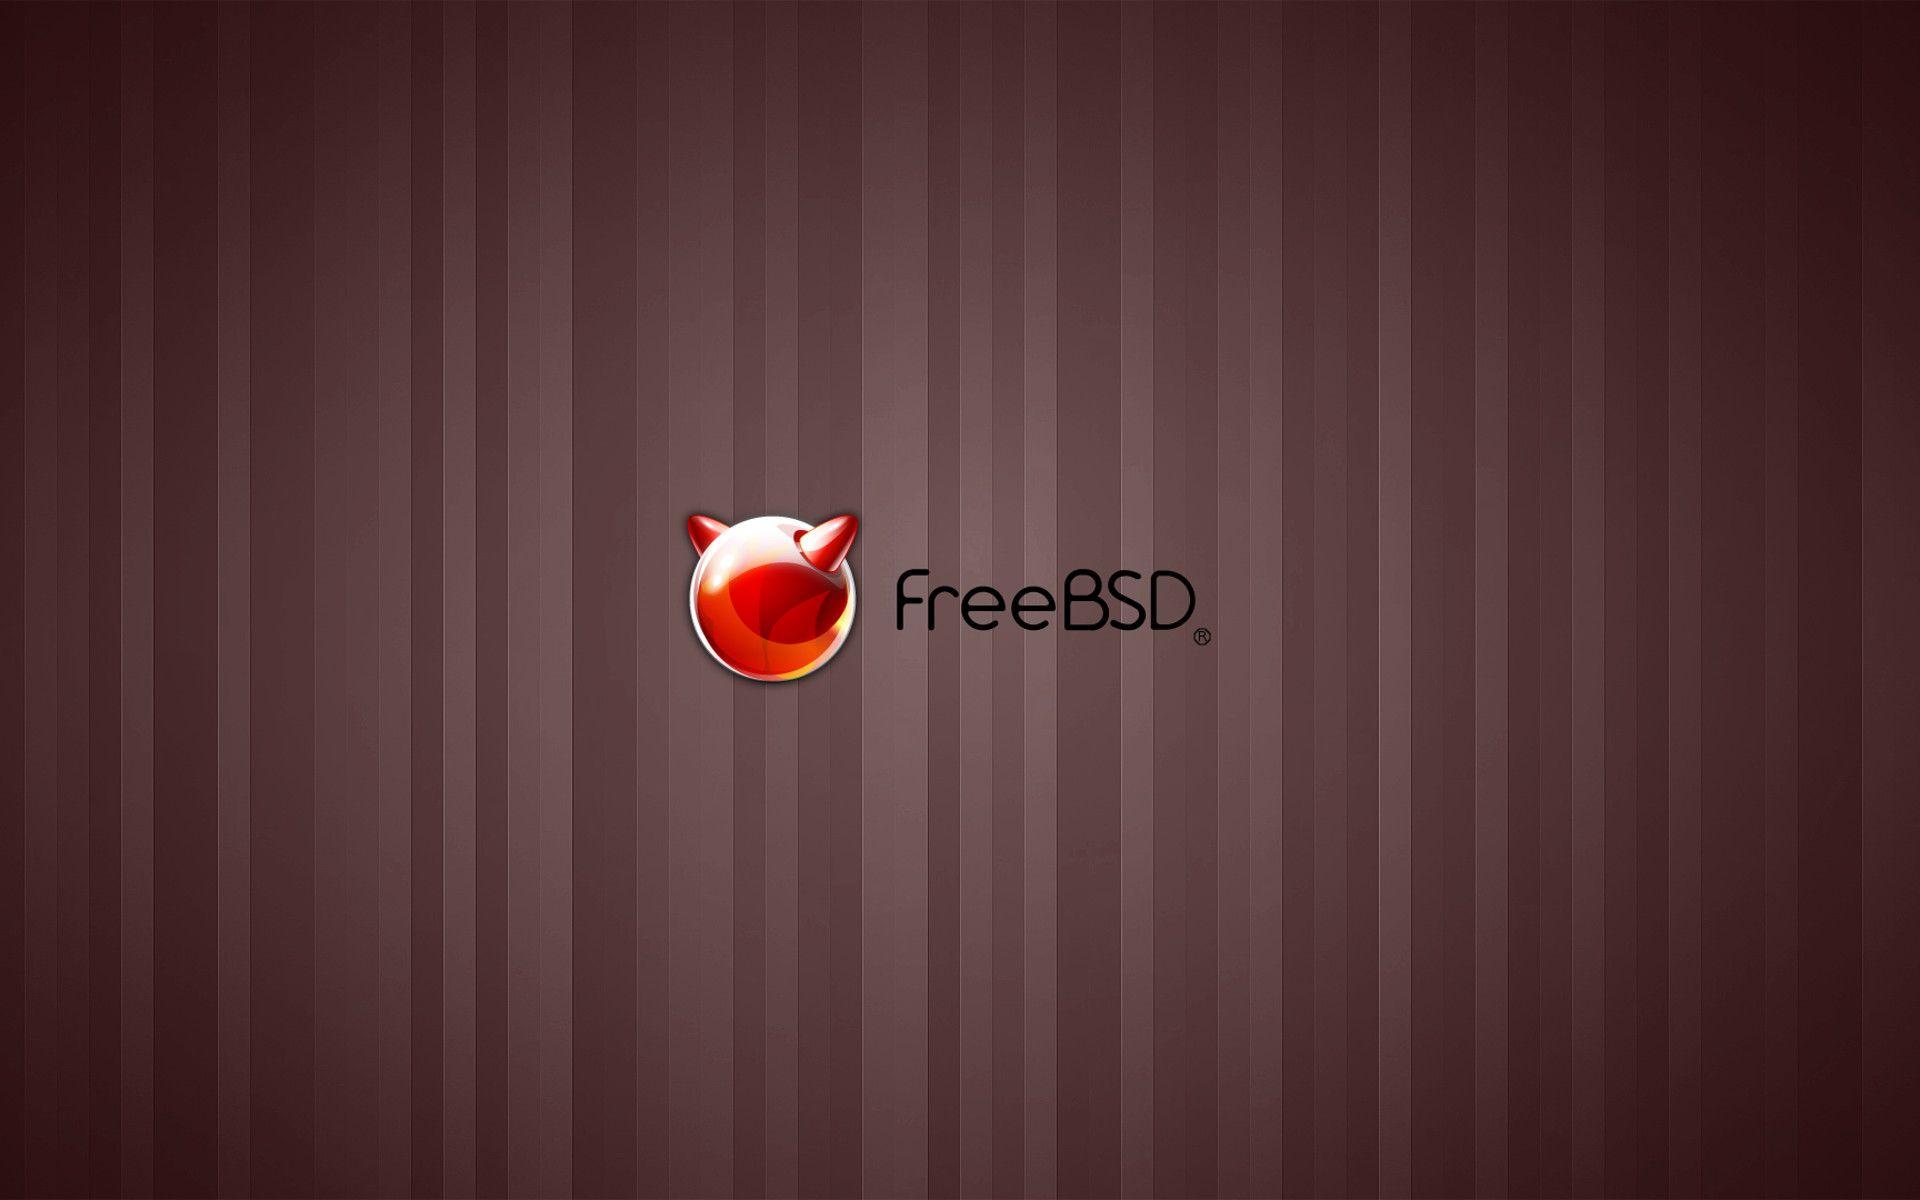 GhostBSD 4.0 Beta 1 Is Not Your Regular BSD Experience